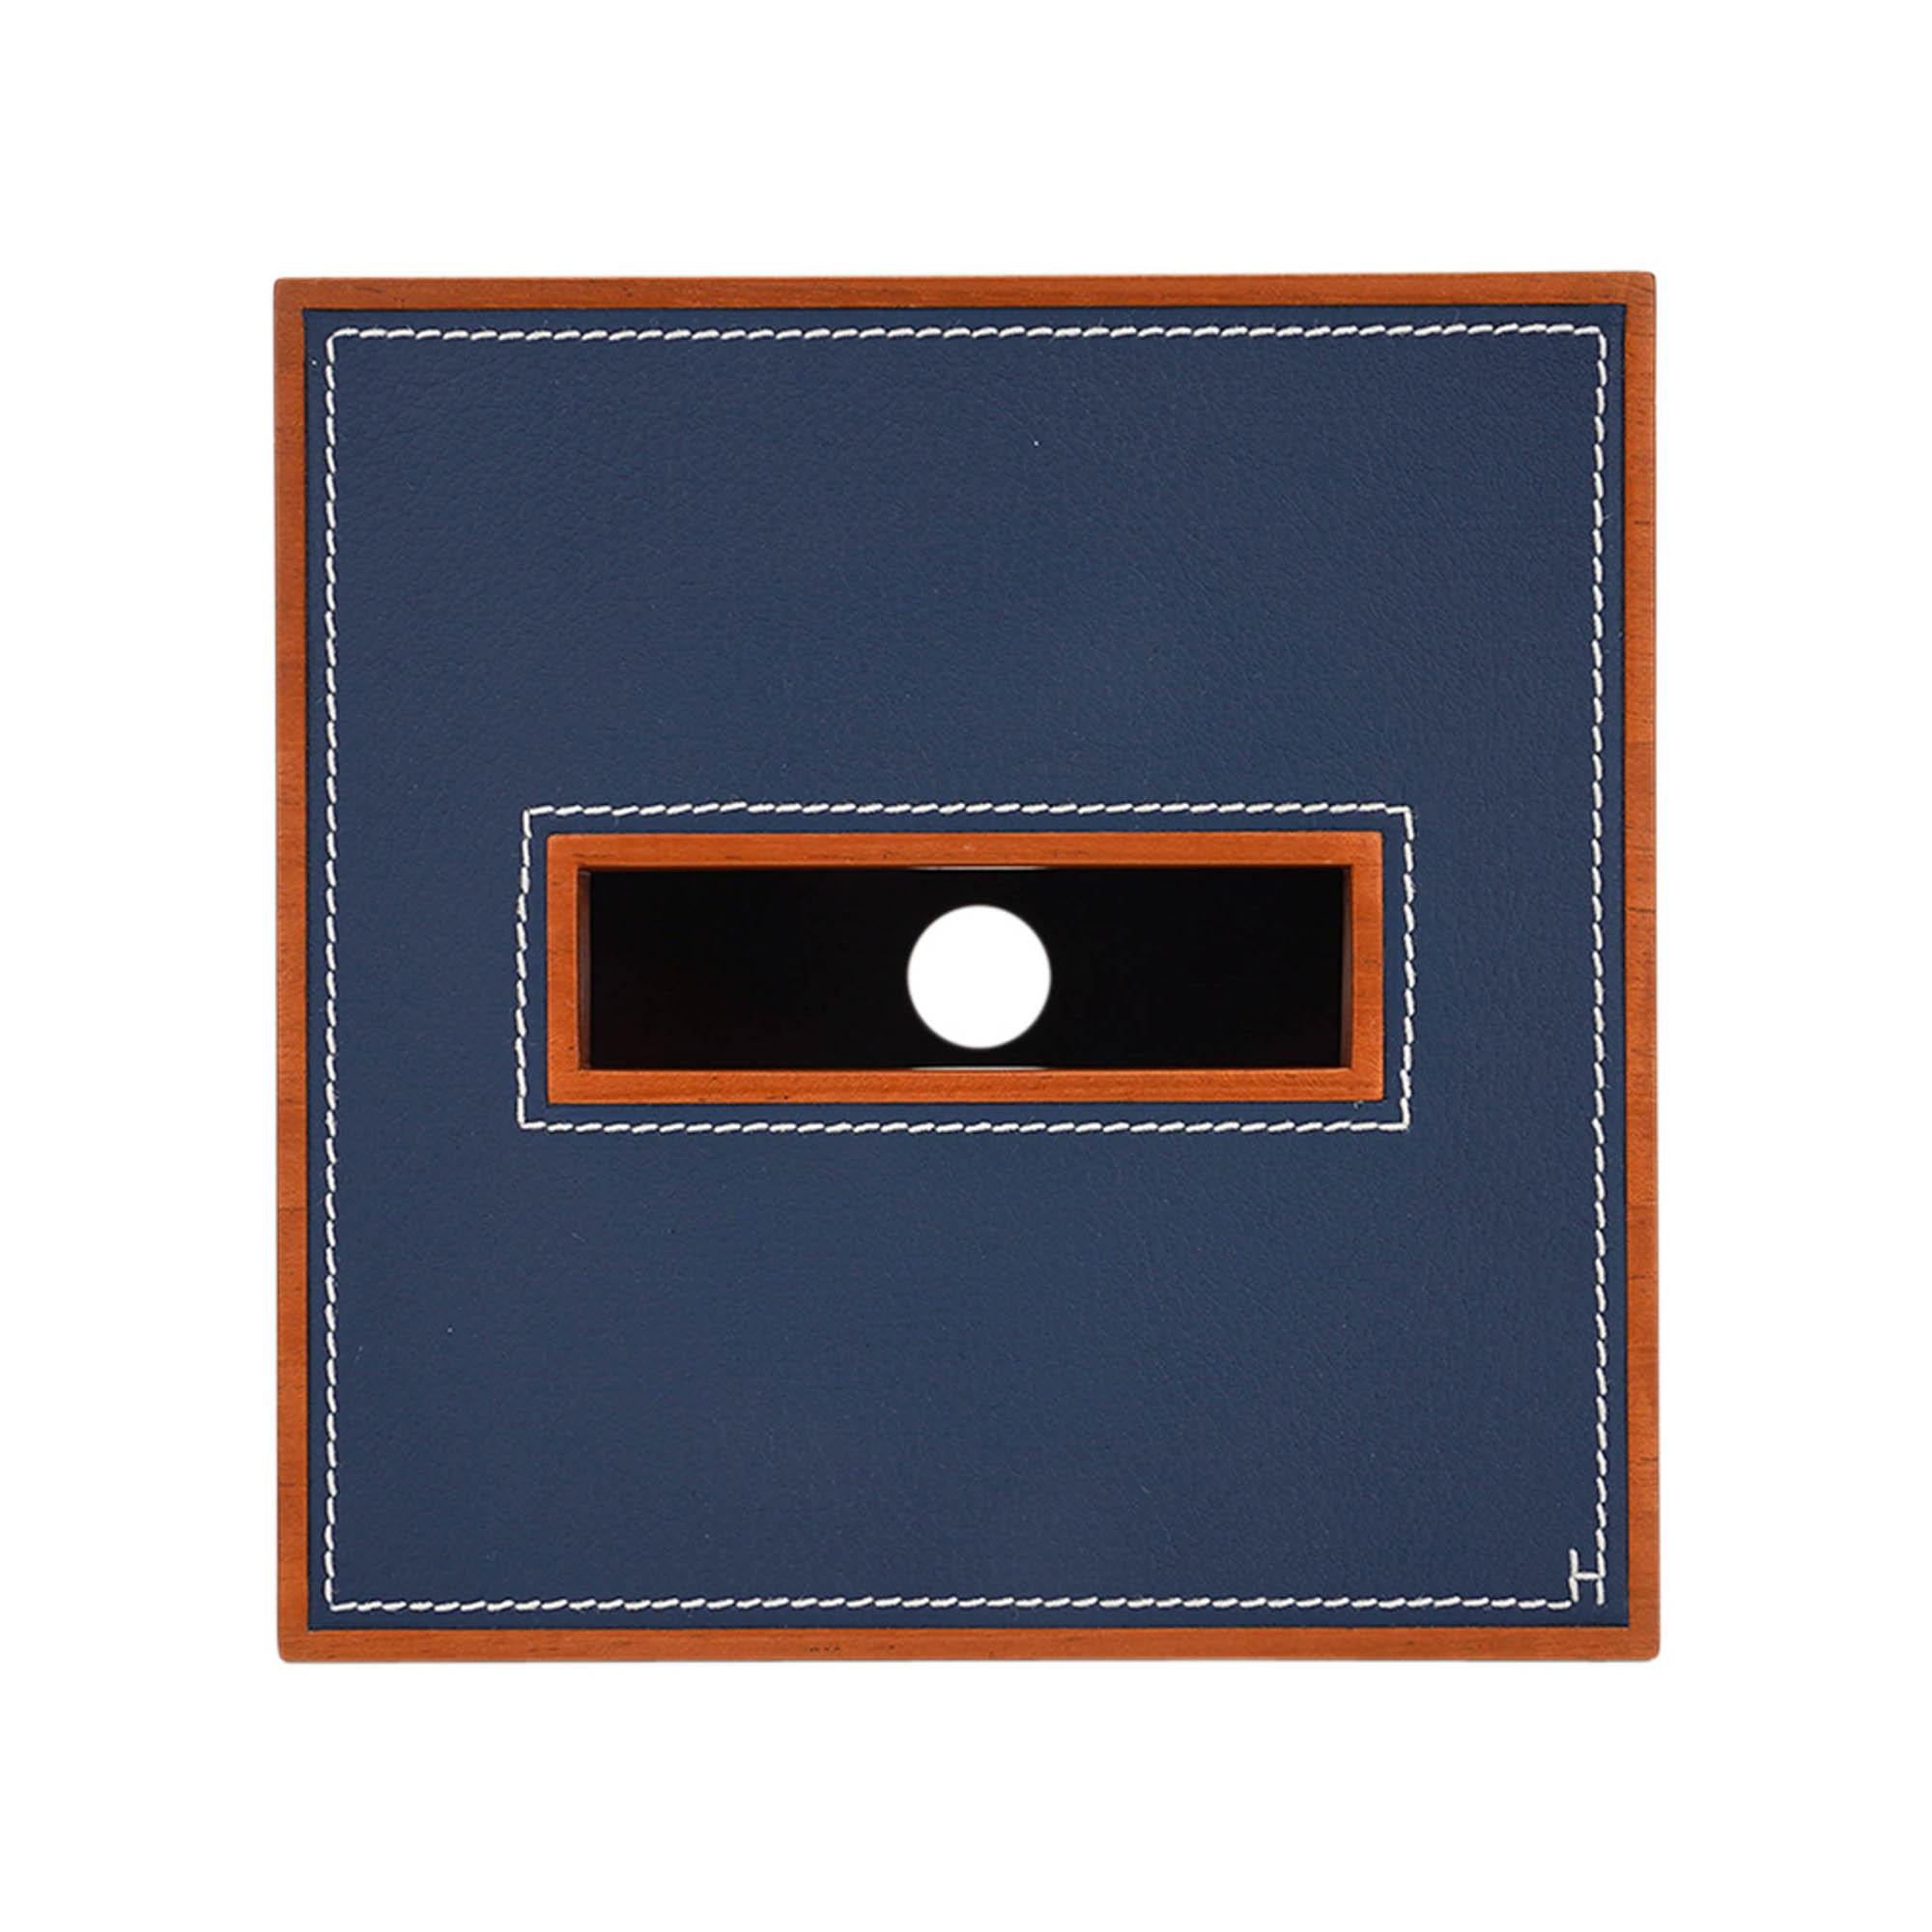 Hermes Pleiade Square Tissue Mahogany Wood Bleu Regate Leather In New Condition For Sale In Miami, FL